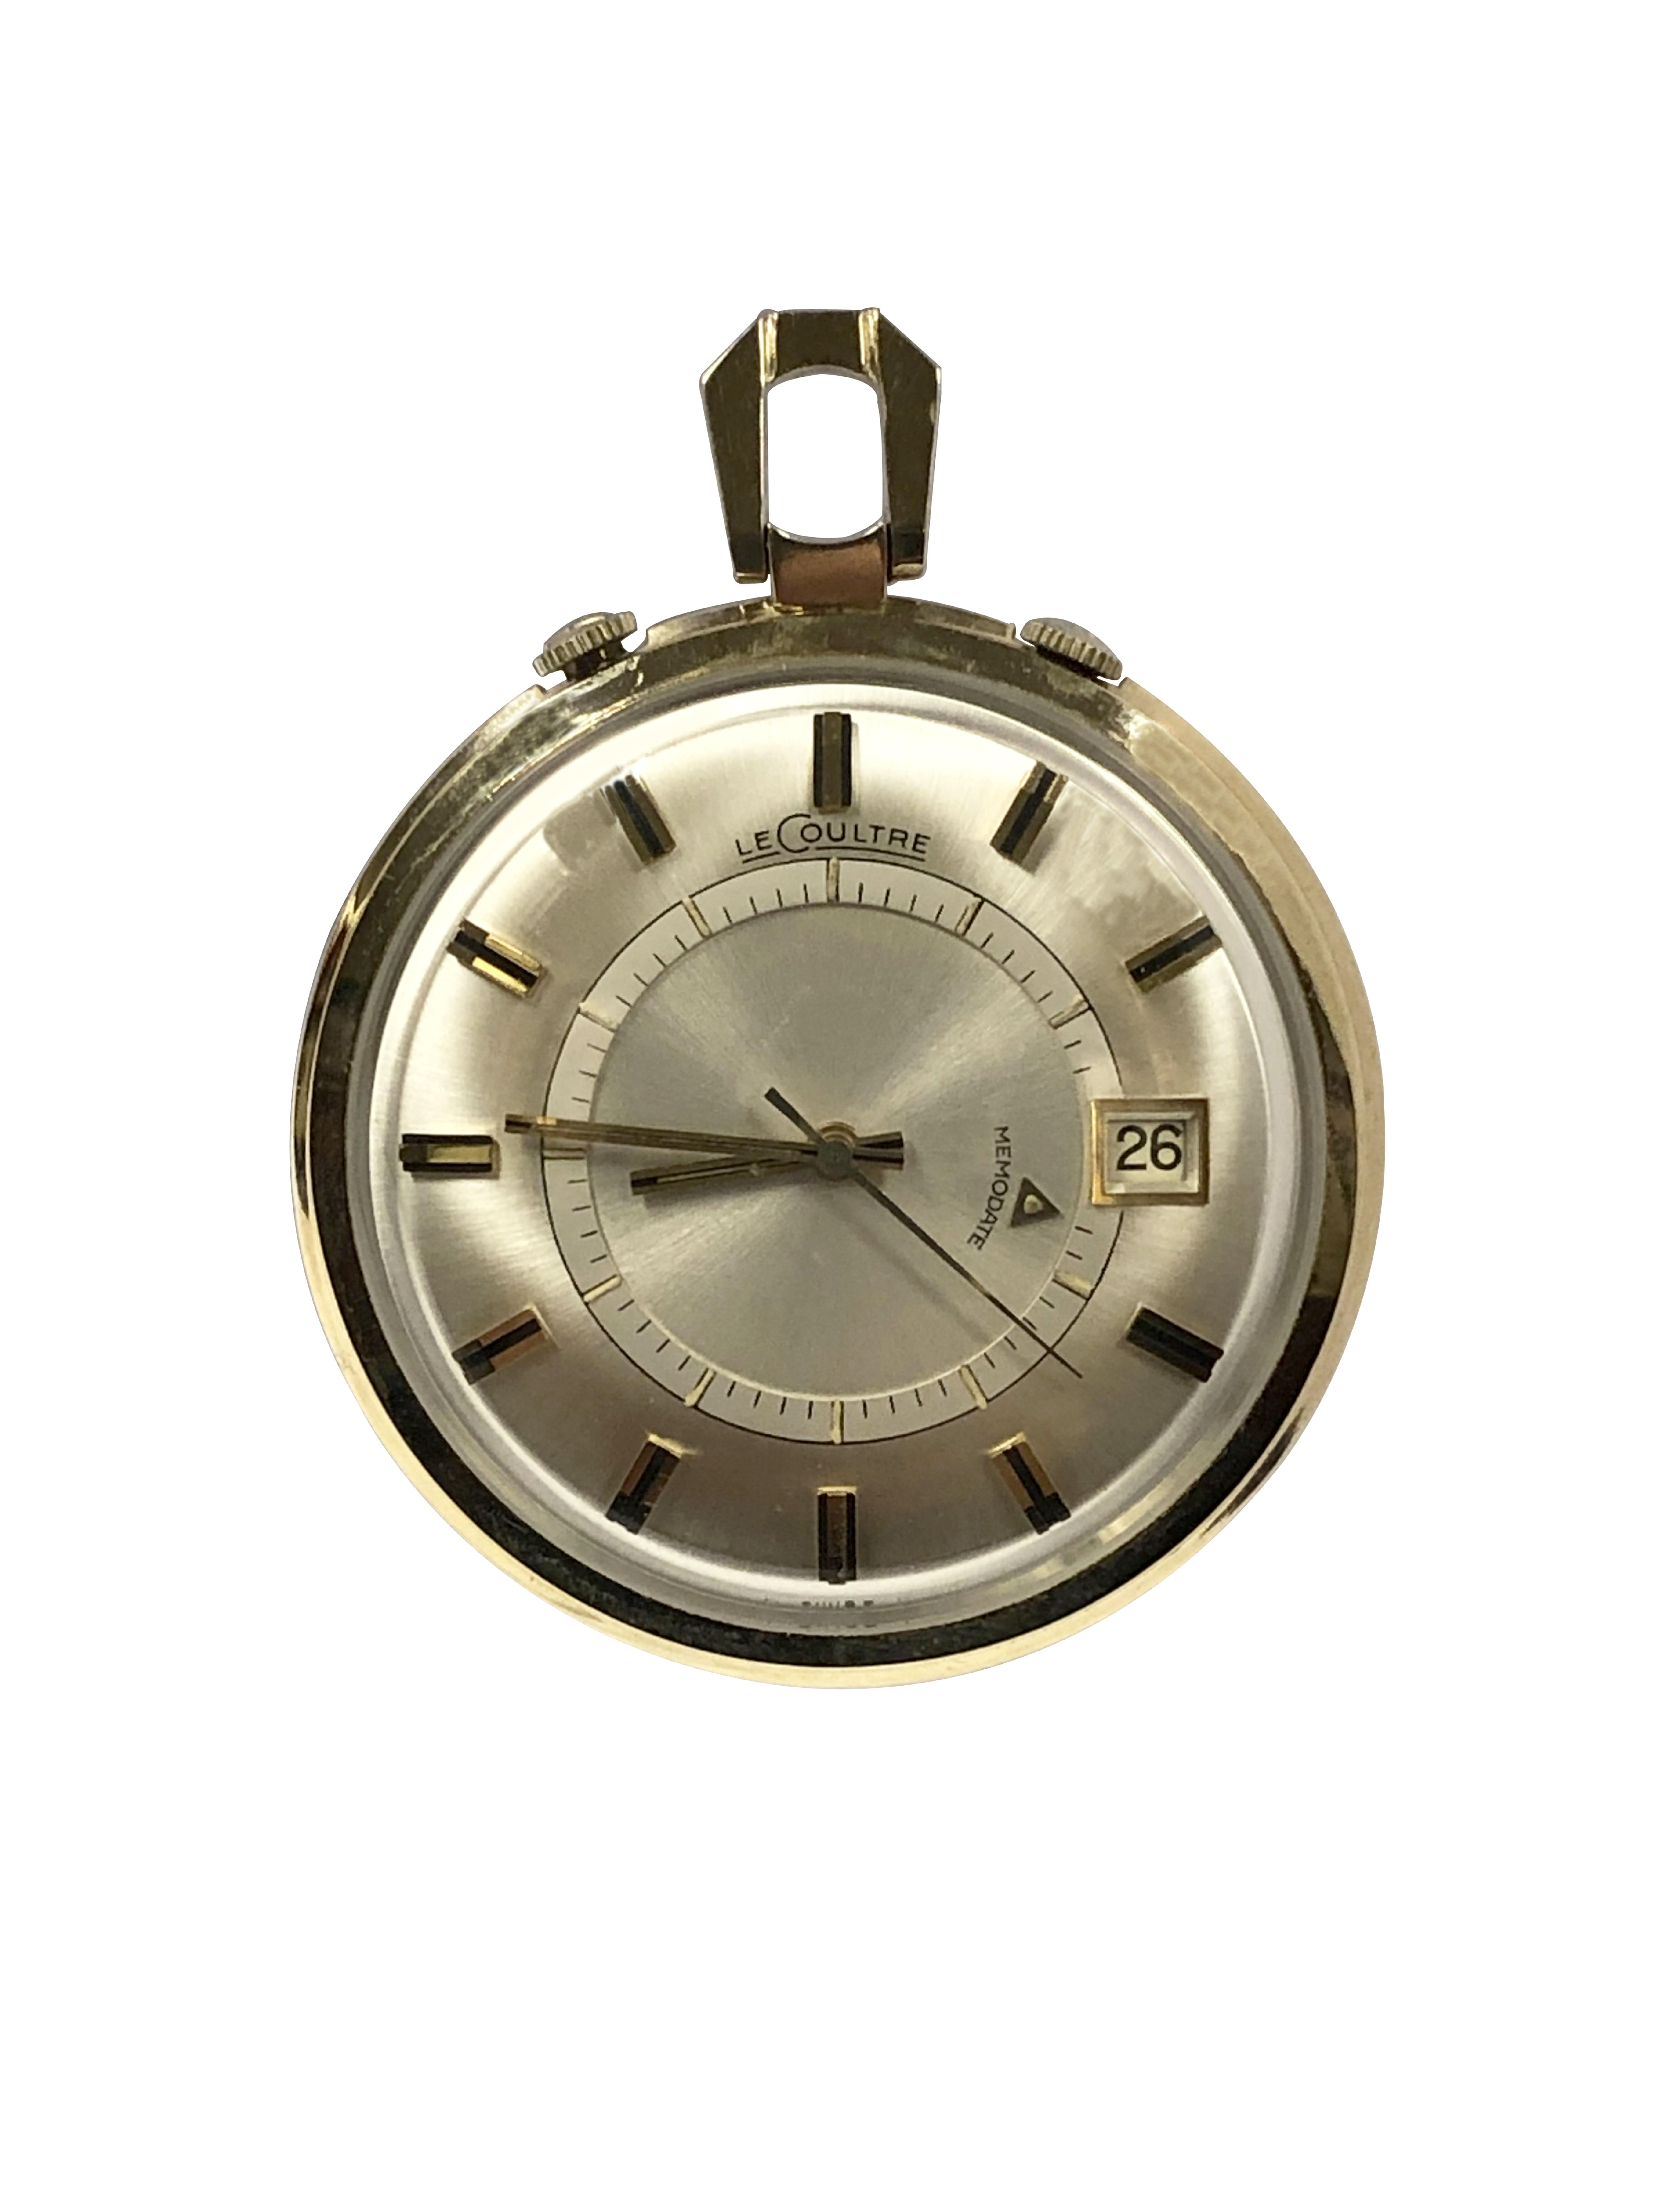 Circa 1960s LeCoultre Ararm Pocket Watch, this is absolutely Pristine, new old stock, never used. 40 M.M. Yellow Gold Filled 2 piece case. Mechanical, Manual Wind Movement with Alarm Function.  Silver Satin dial with raised Gold markers, sweep